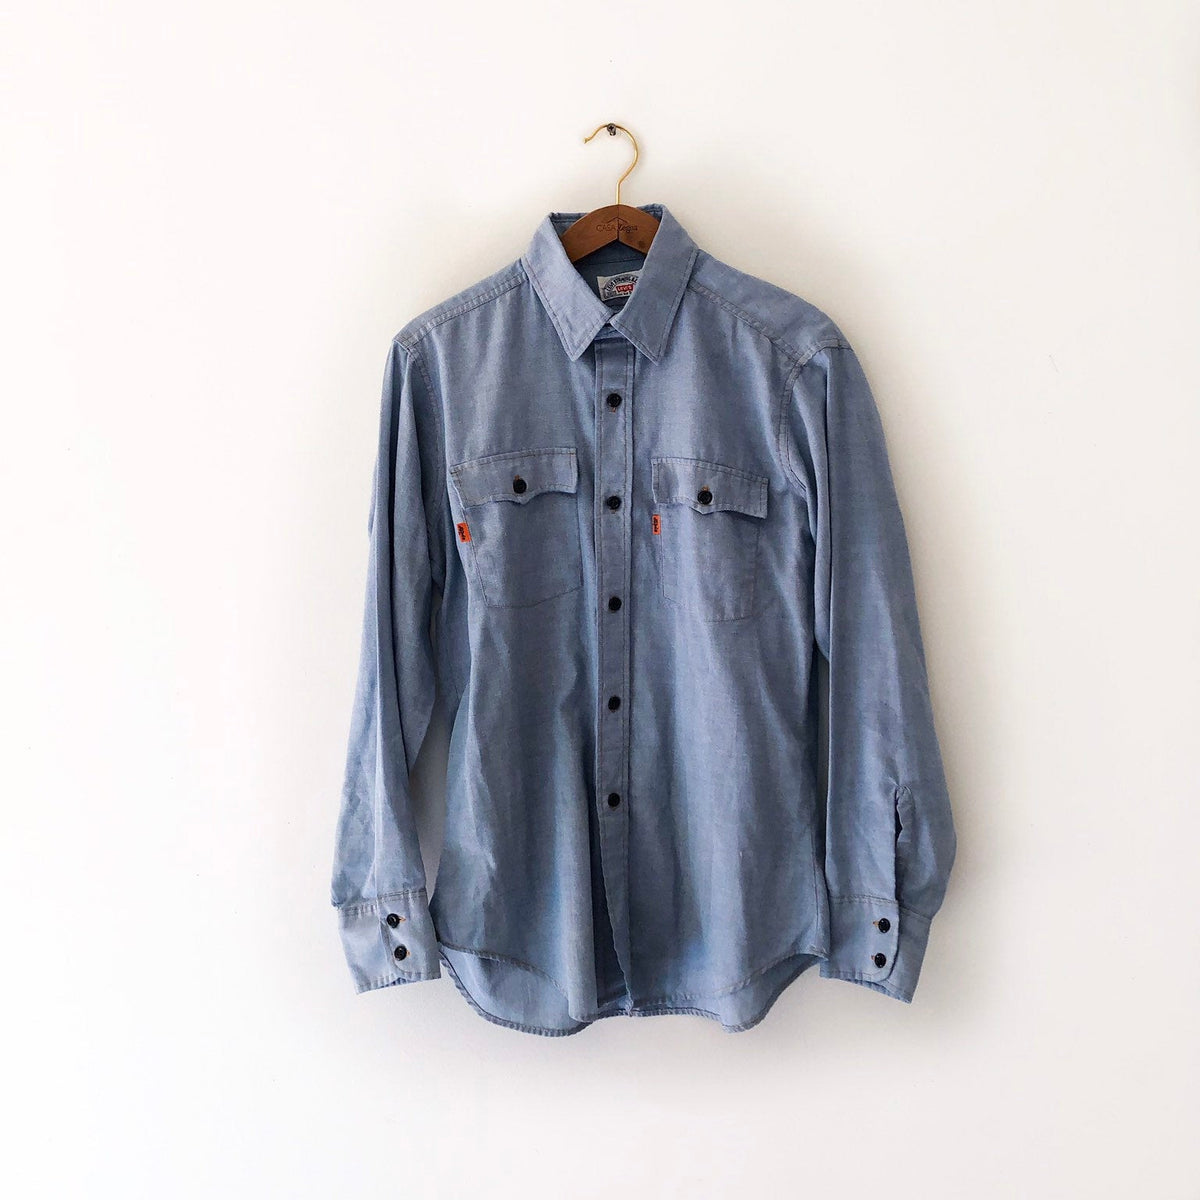 Scored this classic Levi's asymmetrical chambray shirt the other